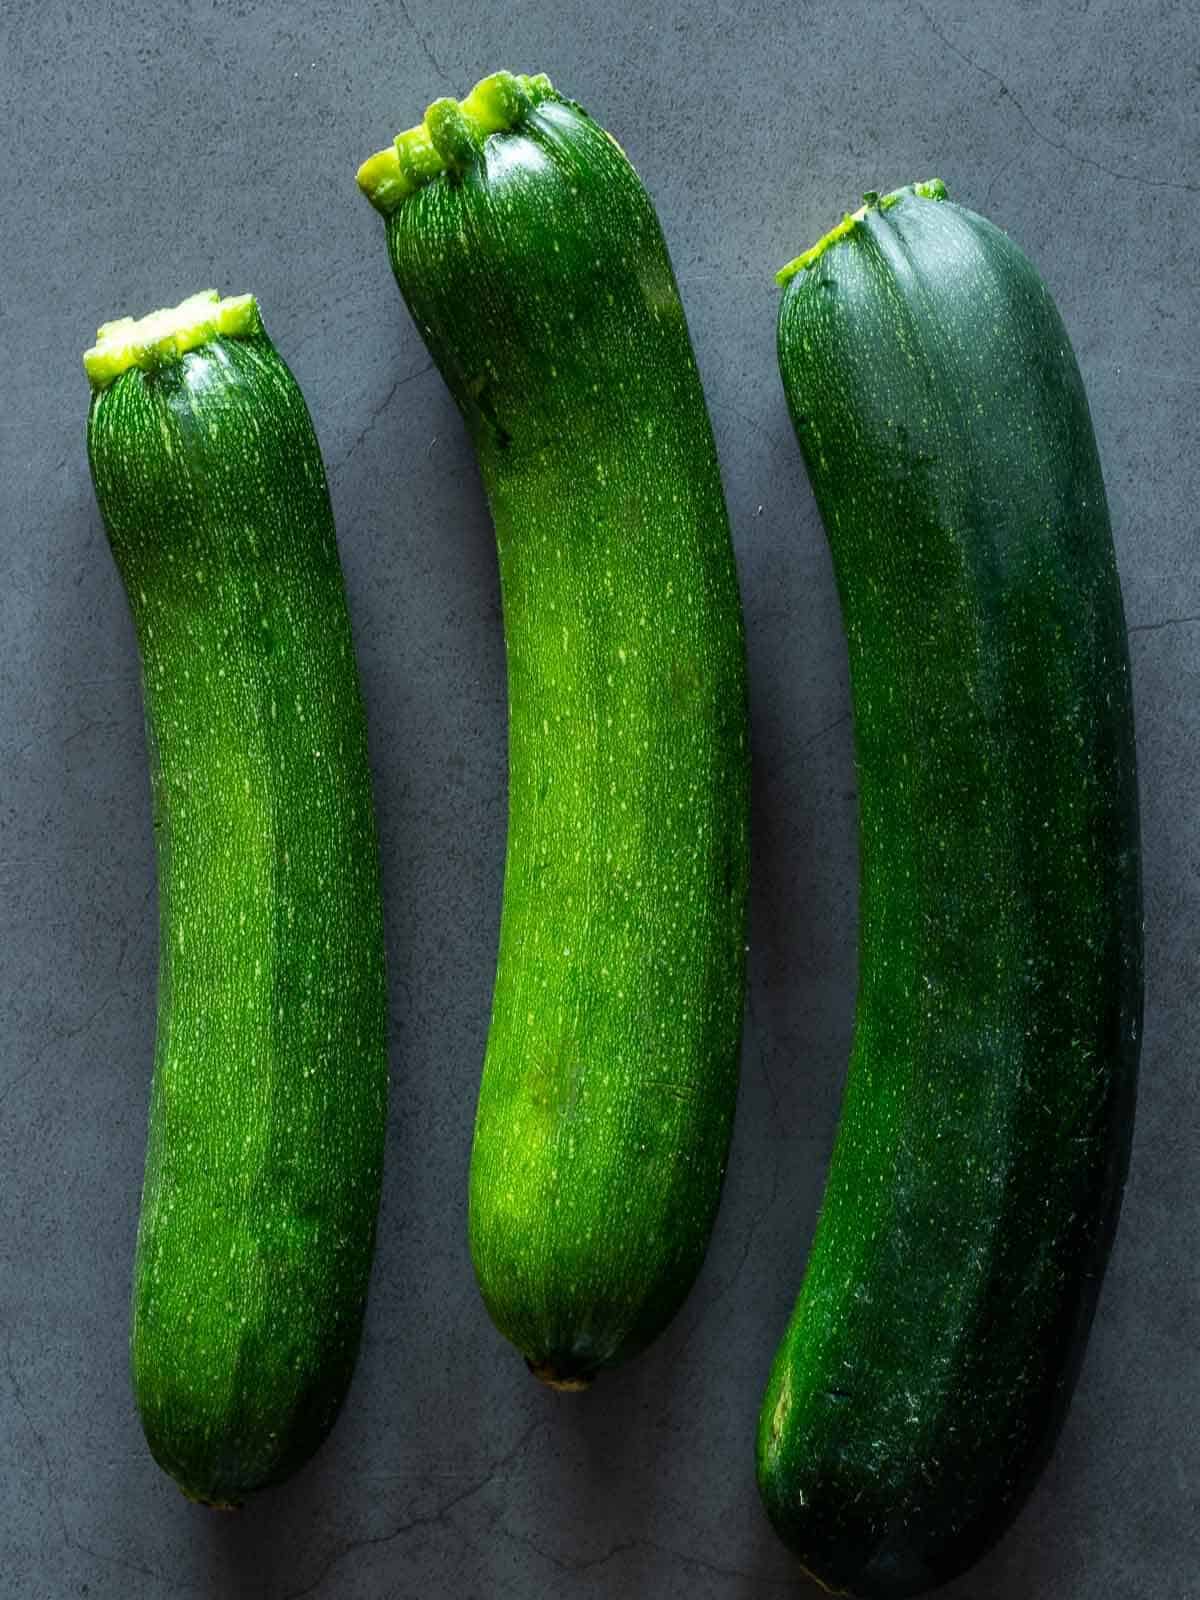 three zucchinis or courgettes on a table.